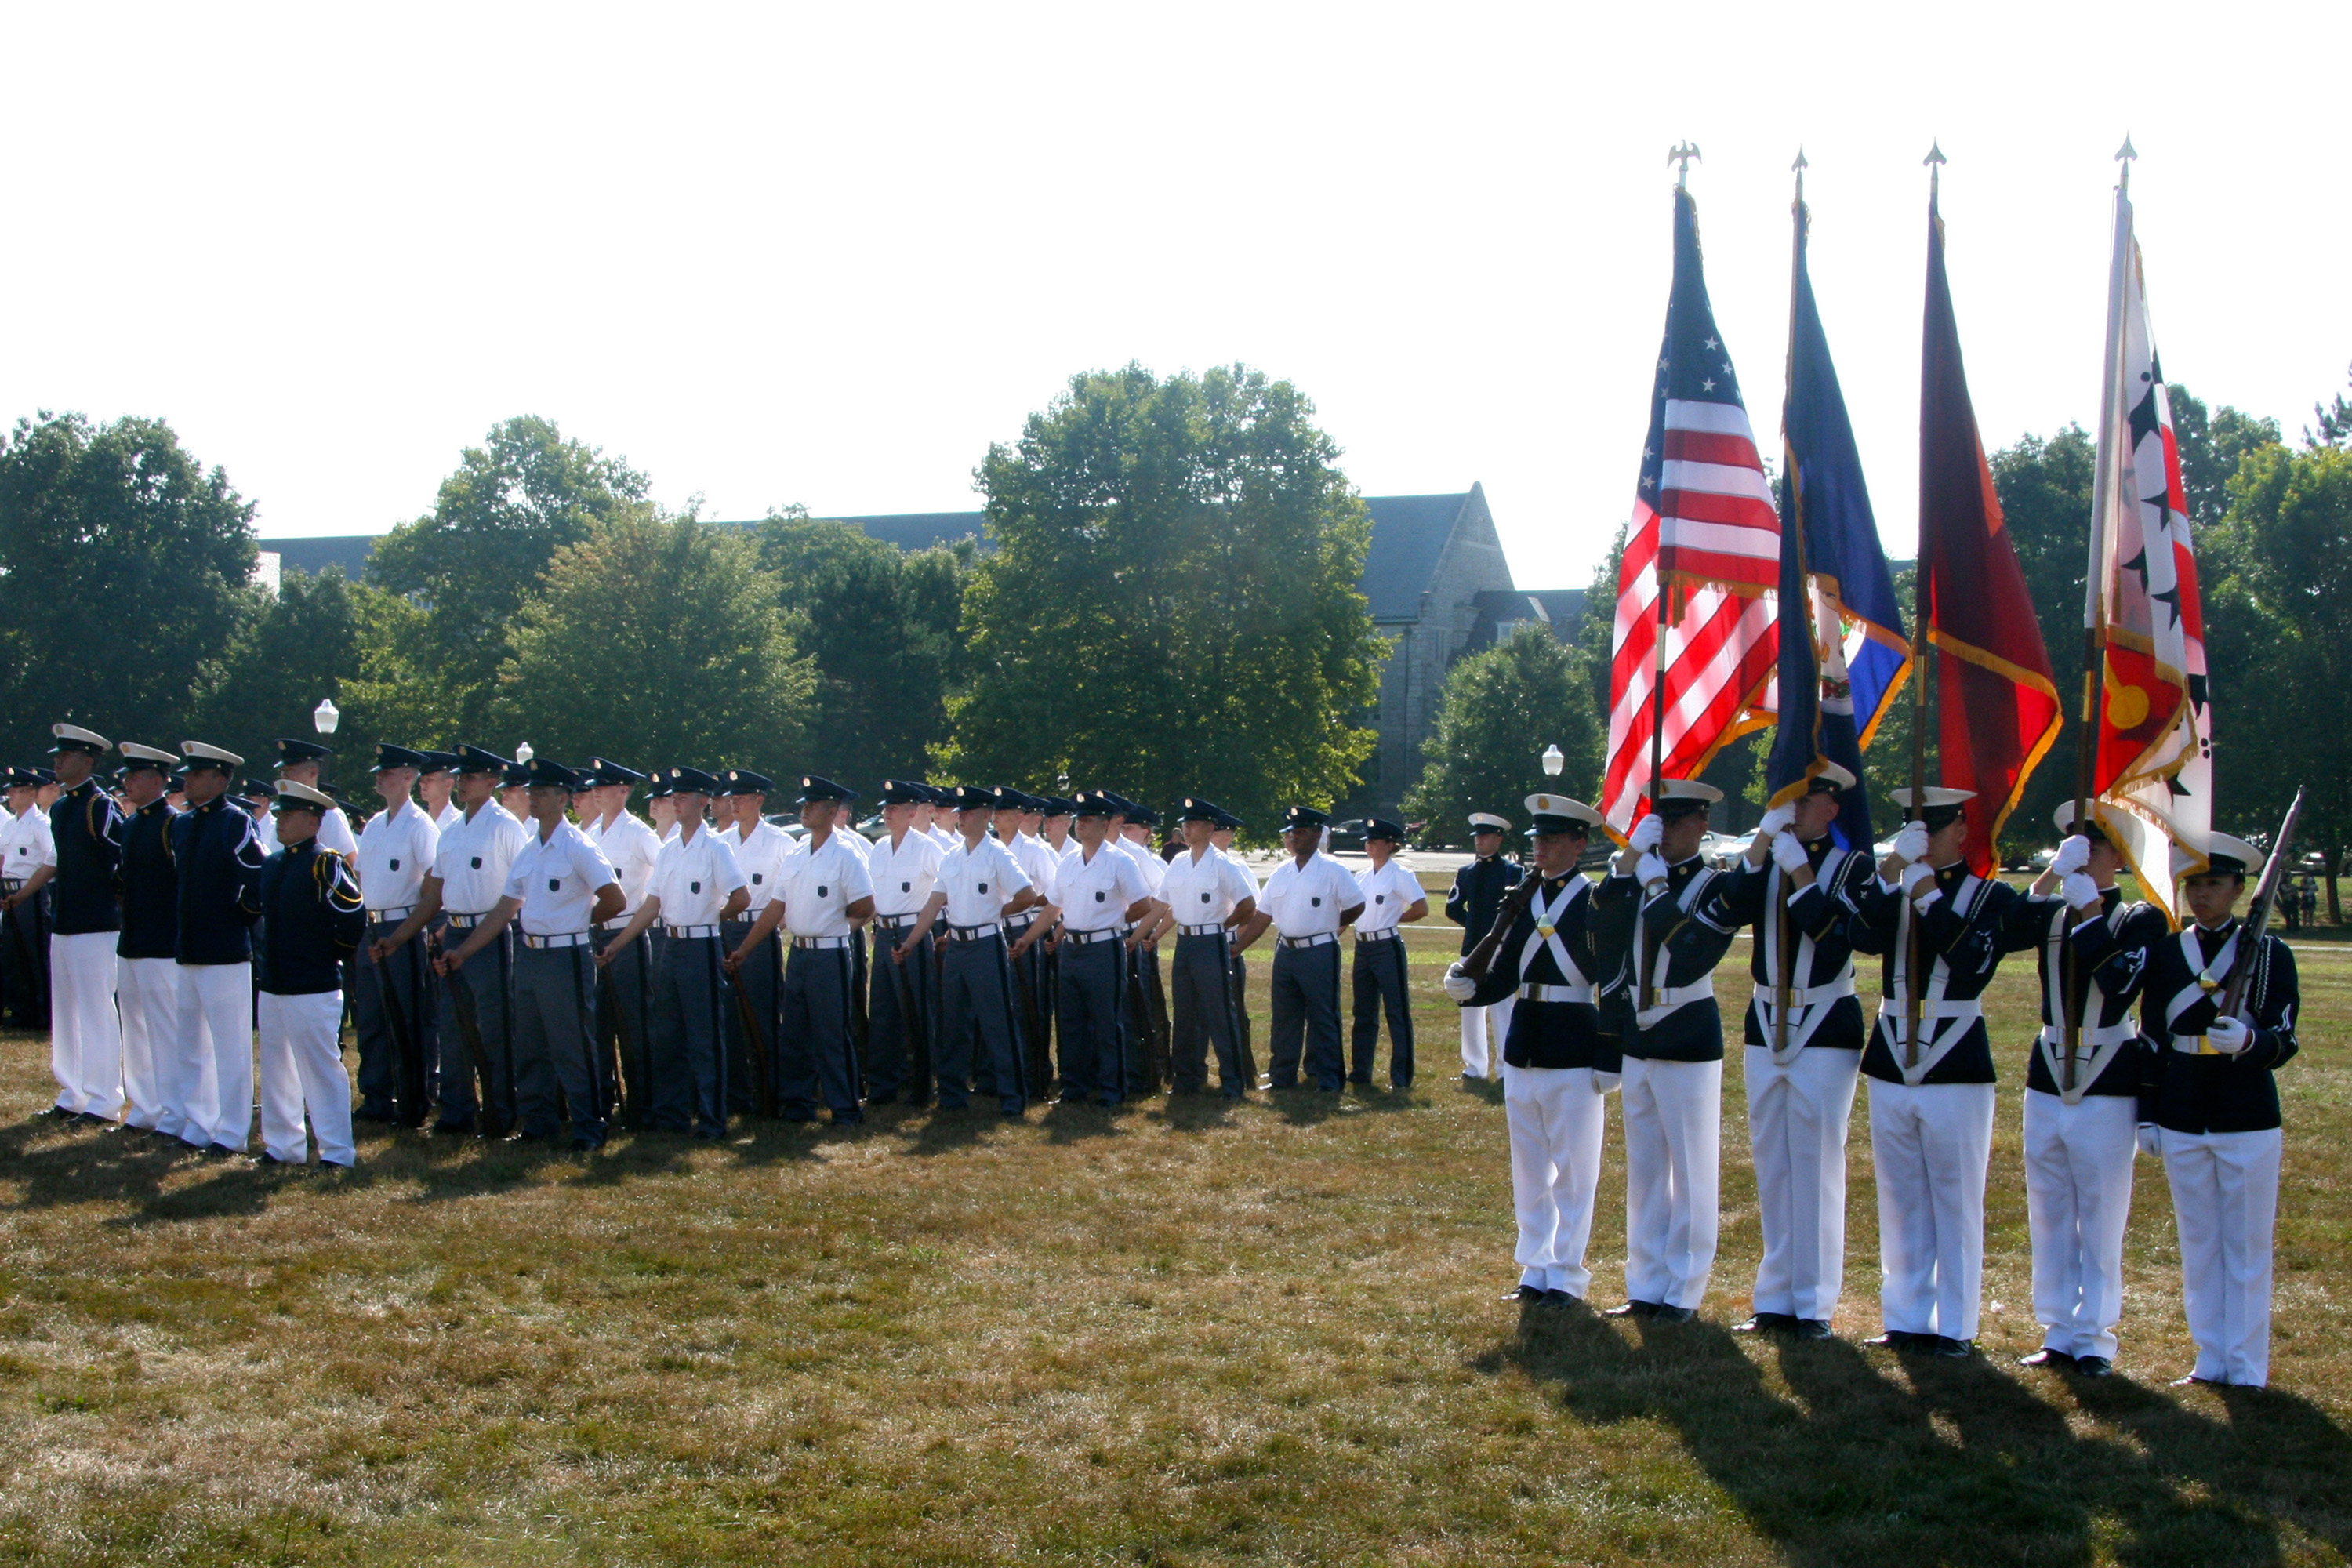 The Virginia Tech Corps of Cadets New Cadet Parade each August welcomes the new Corps of Cadets members, shown on the Drillfield, as they officially join the Regiment